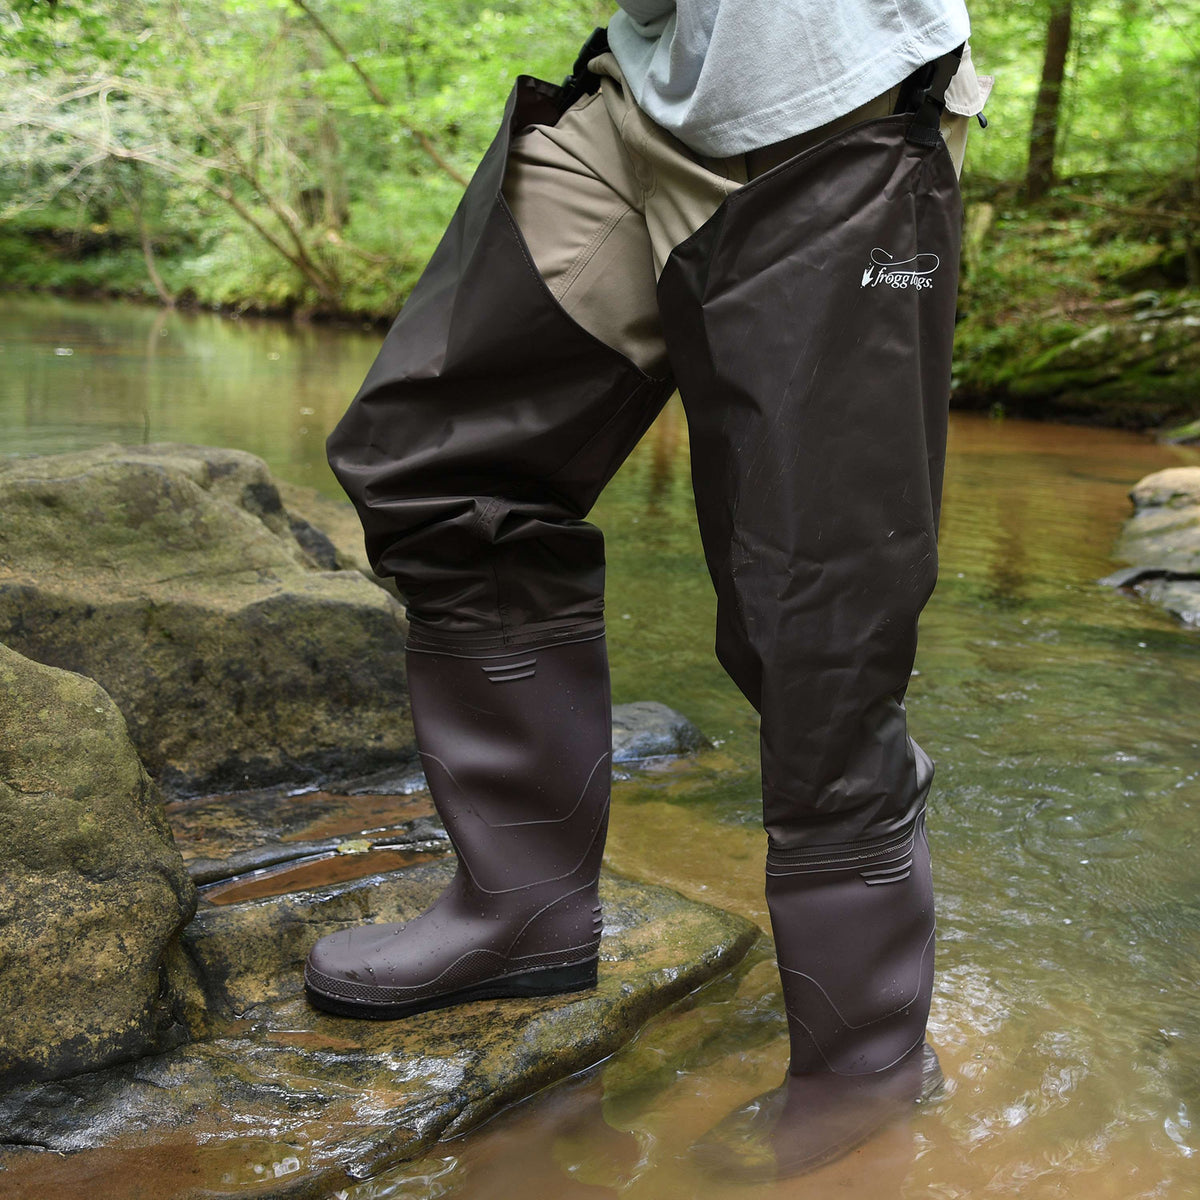 Frogg Toggs 2716249-10 Rana II PVC/Nylon Hip Wader with Cleated Sole,  Brown, Size 10 - Valley, AL - Industrial Service & Supply